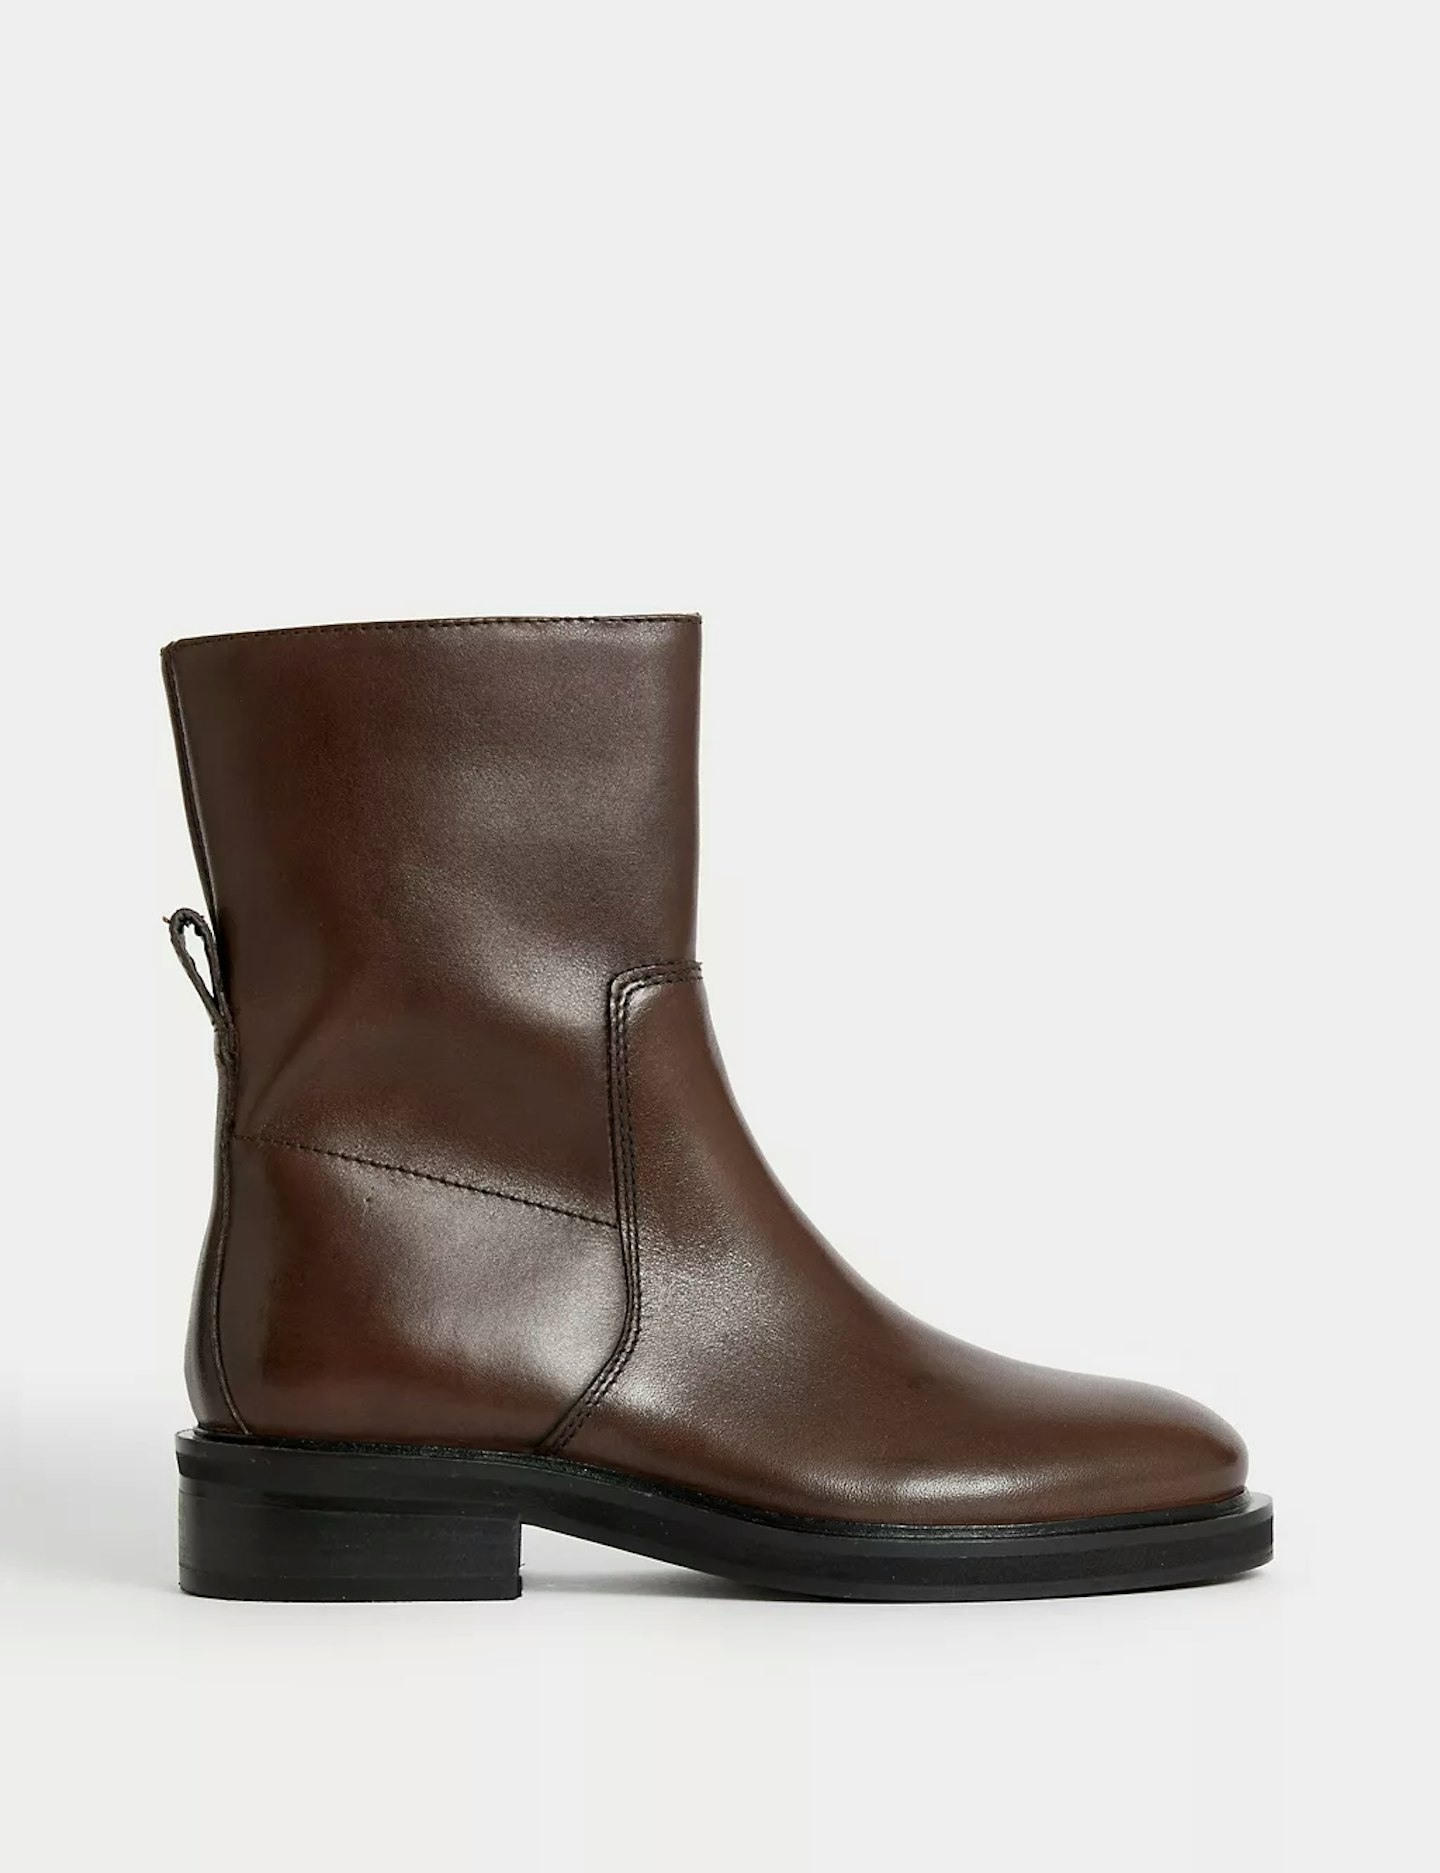 M&S, Leather Flatform Round-Toe Ankle Boots